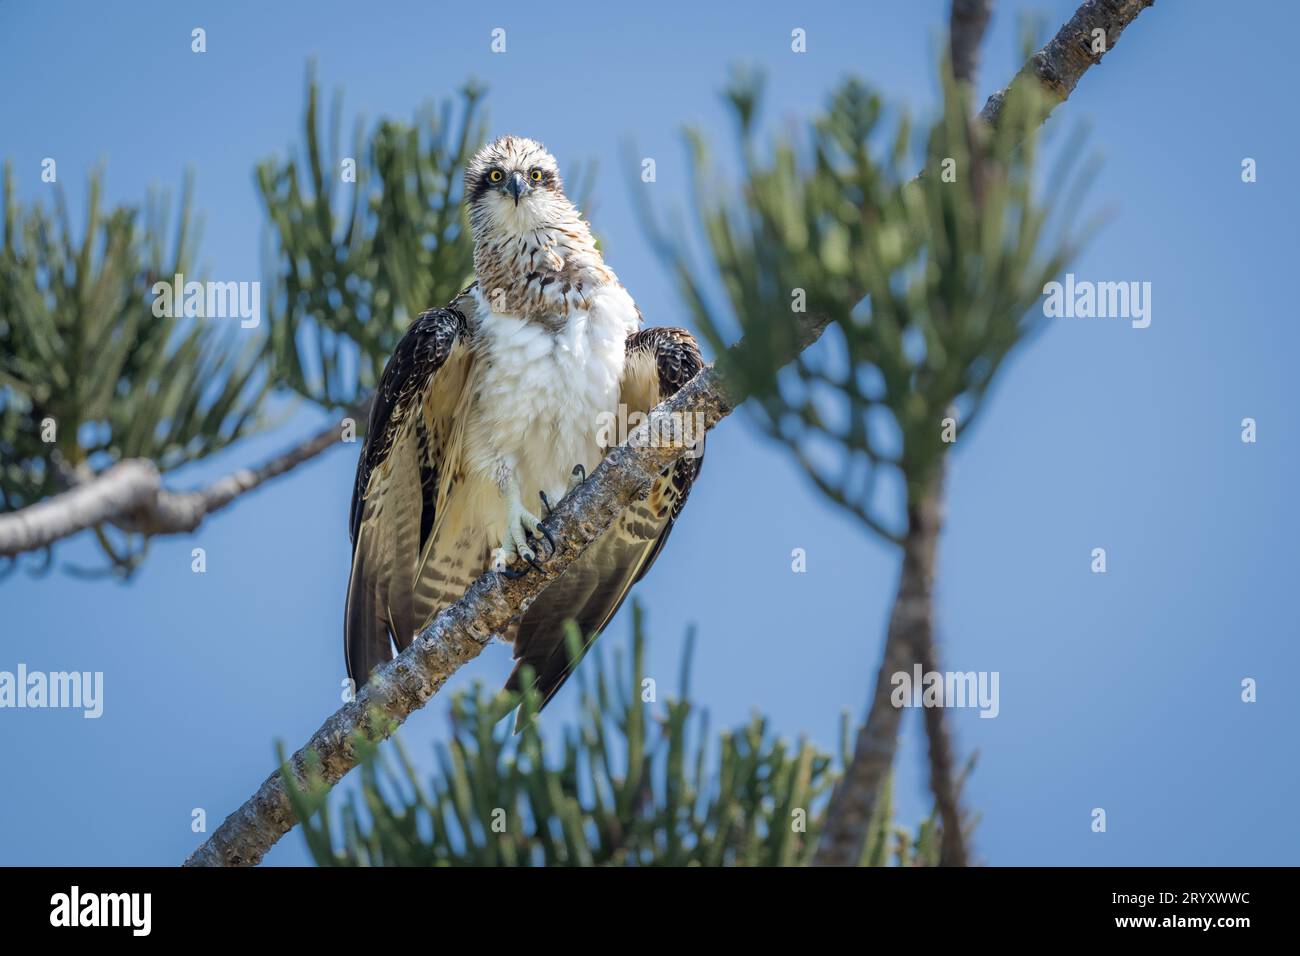 Perched atop a tall, Weathered Hoop Pine on Magnetic Island in Townsville, Australia, an Eastern Osprey has a 360 degree view of its territory. Stock Photo